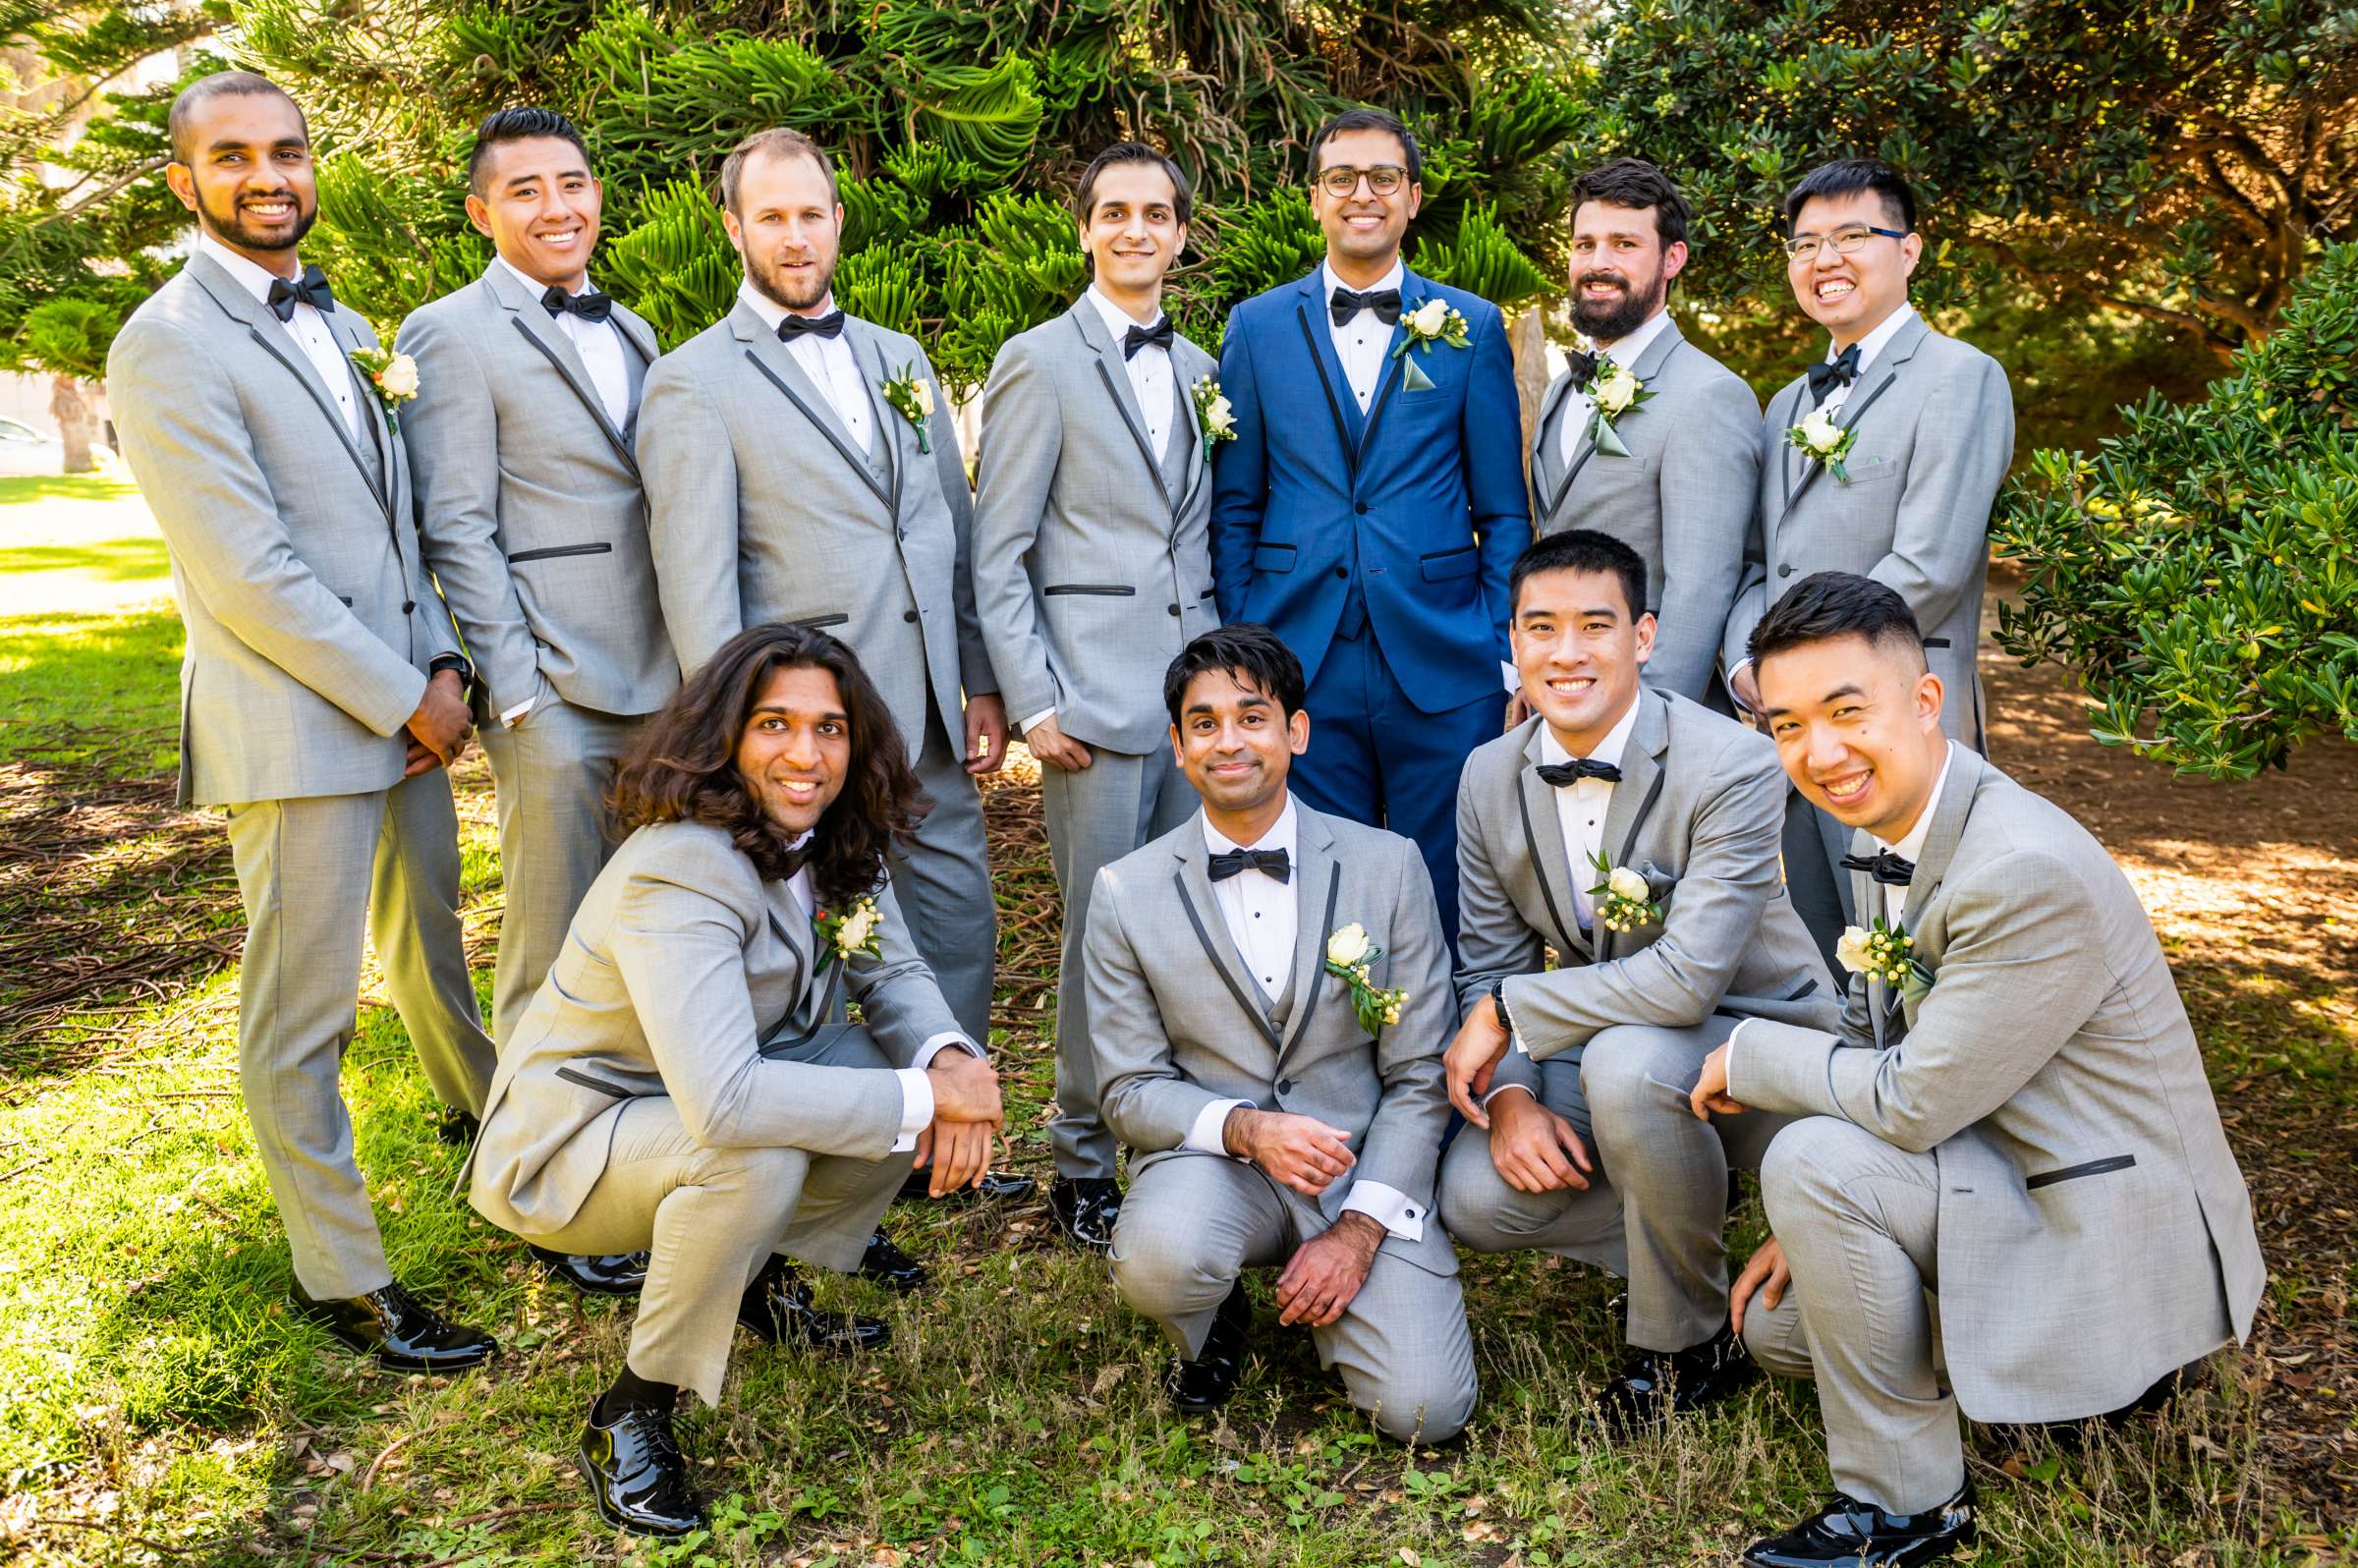 Event coordinated by Holly Kalkin Weddings, Rachel and Anand Event Photo #6 by True Photography